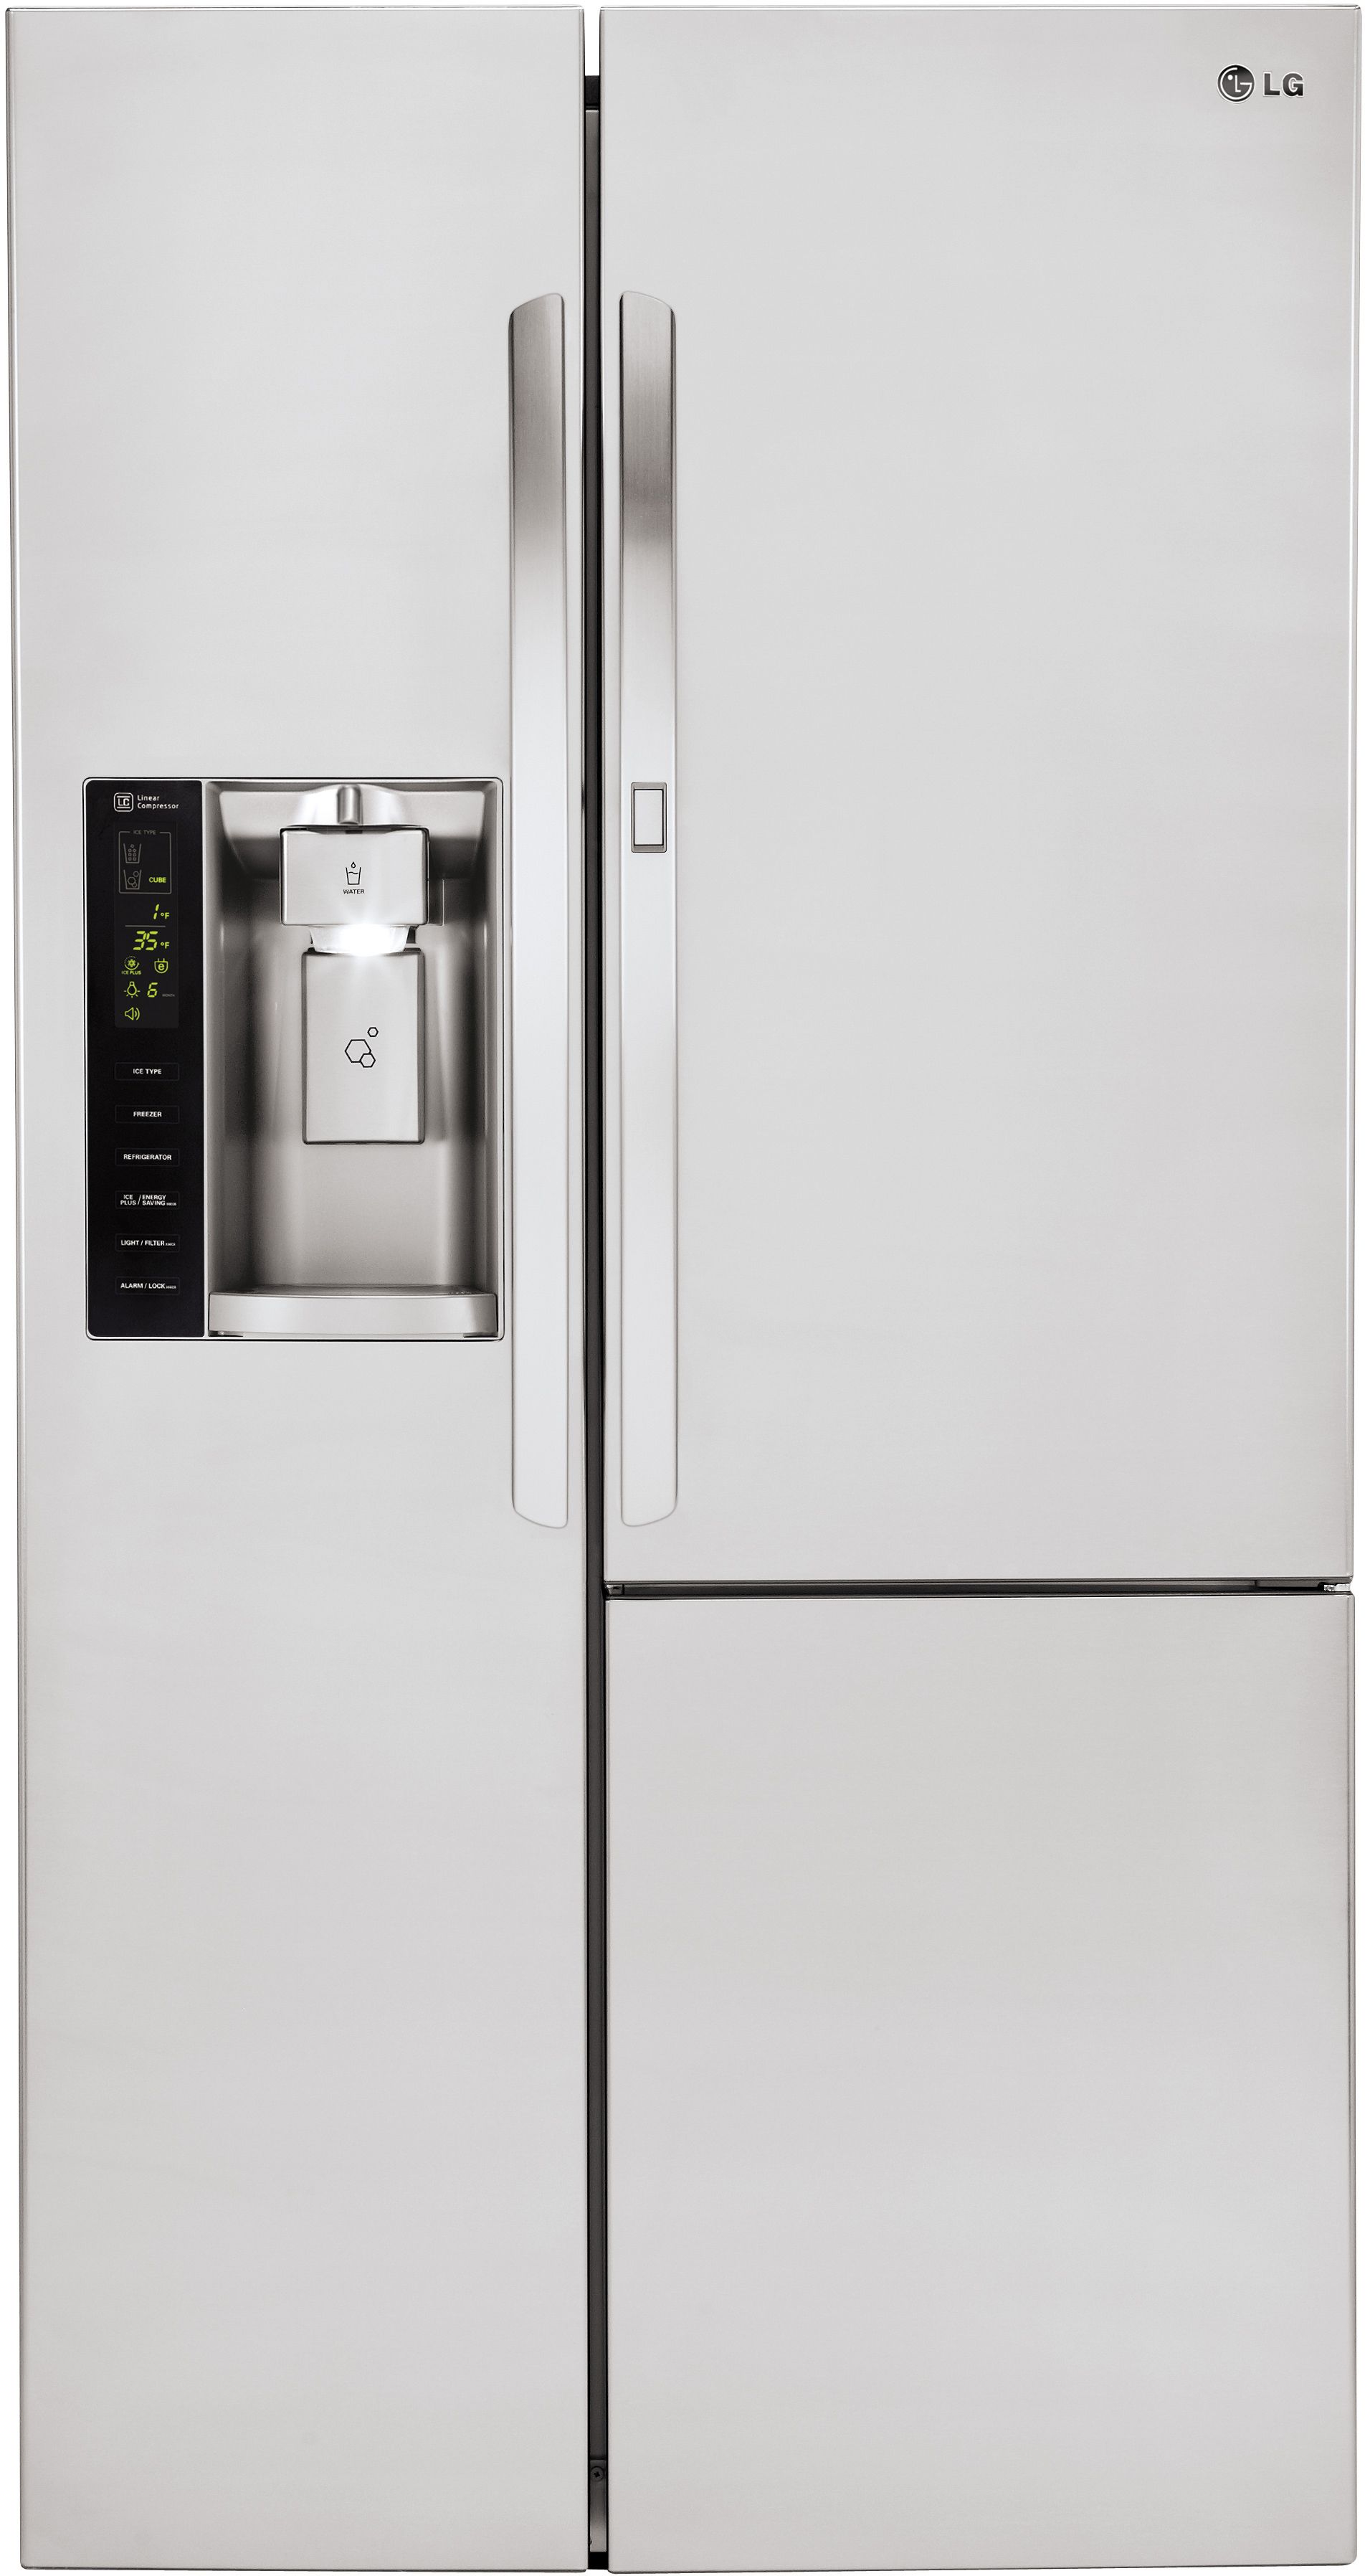 LG 26.1 Cu. Ft. Stainless Steel Side-By-Side Refrigerator